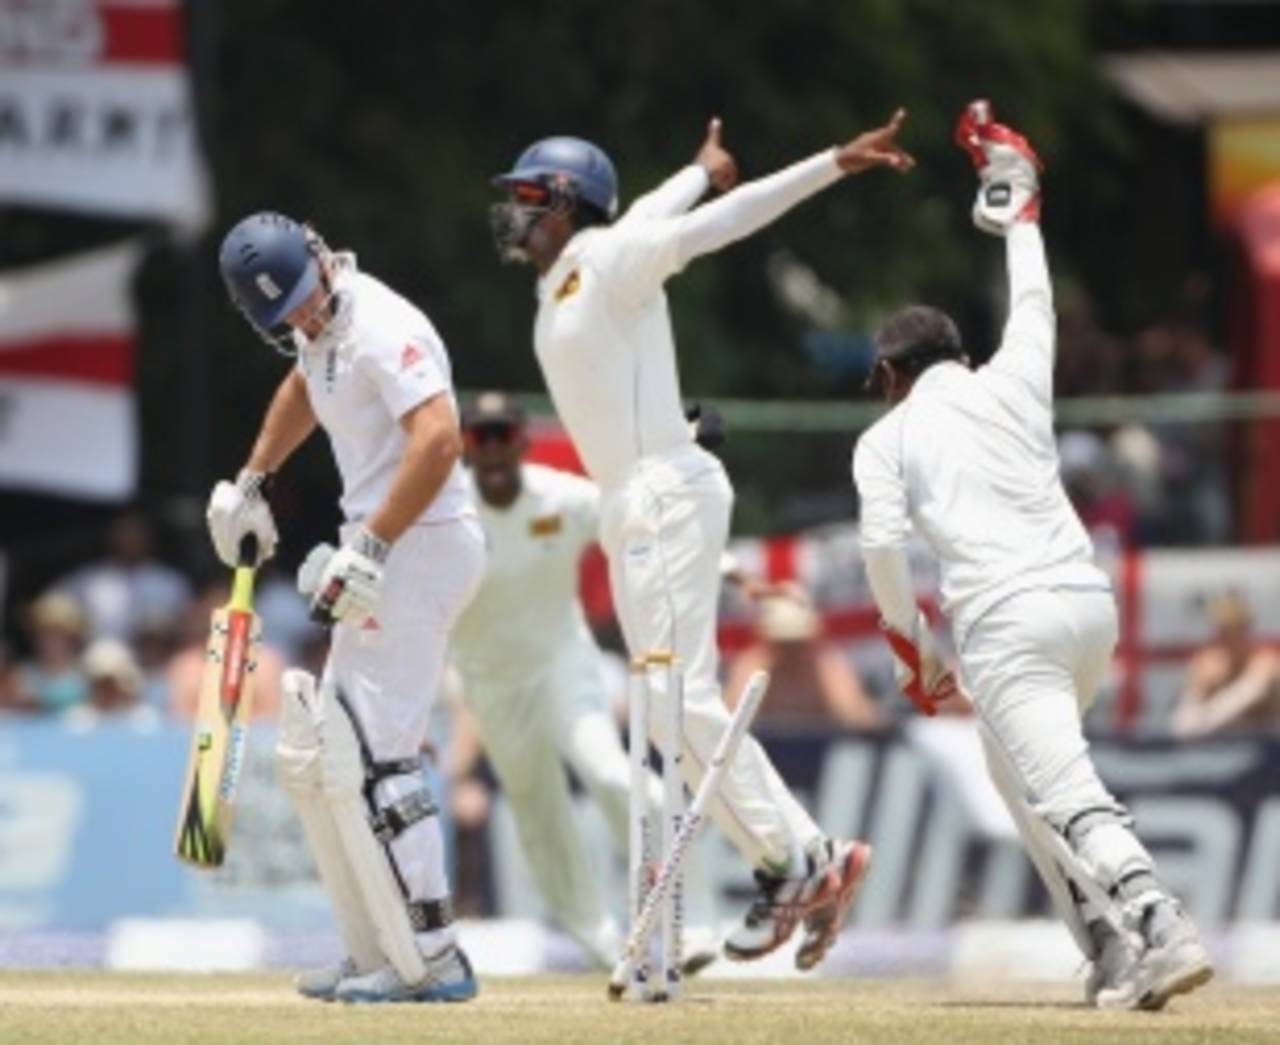 Andrew Strauss was bowled for a duck, Sri Lanka v England, 2nd Test, Colombo, P Sara Oval, 5th day, April 7, 2012